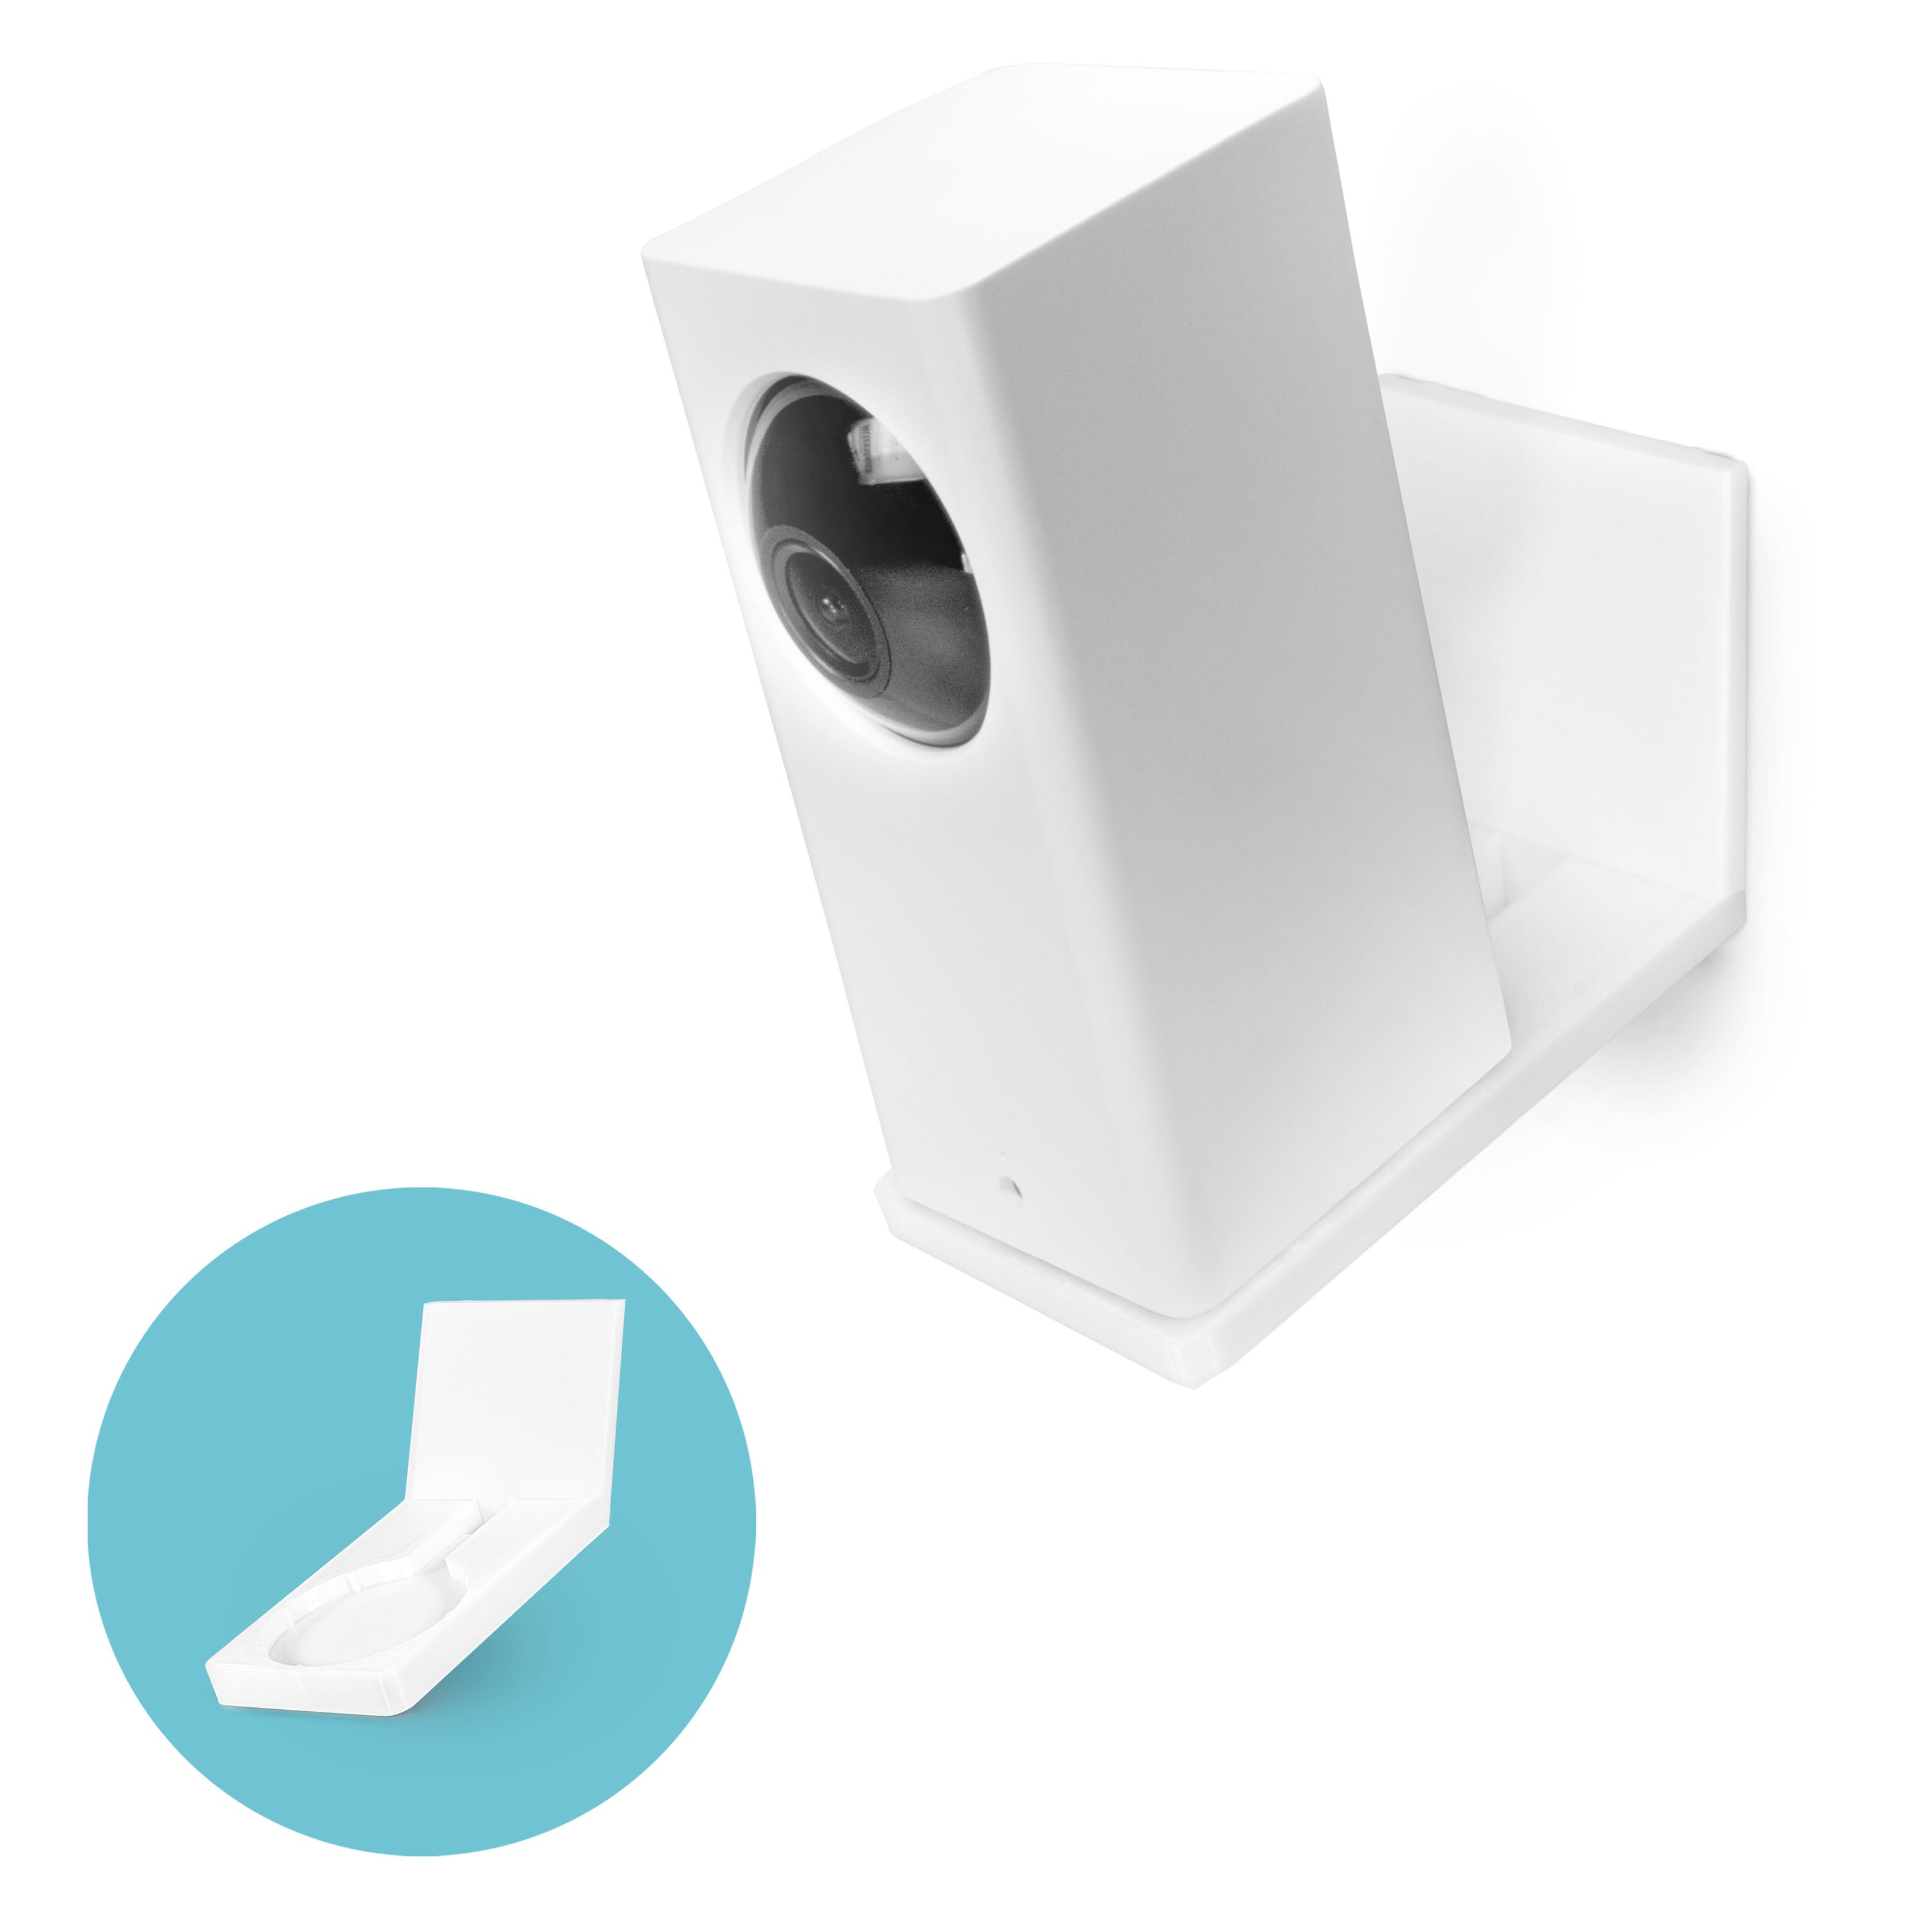 Corner Wall Mount for LaView 1080P HD Indoor Cam (LV-PWF1